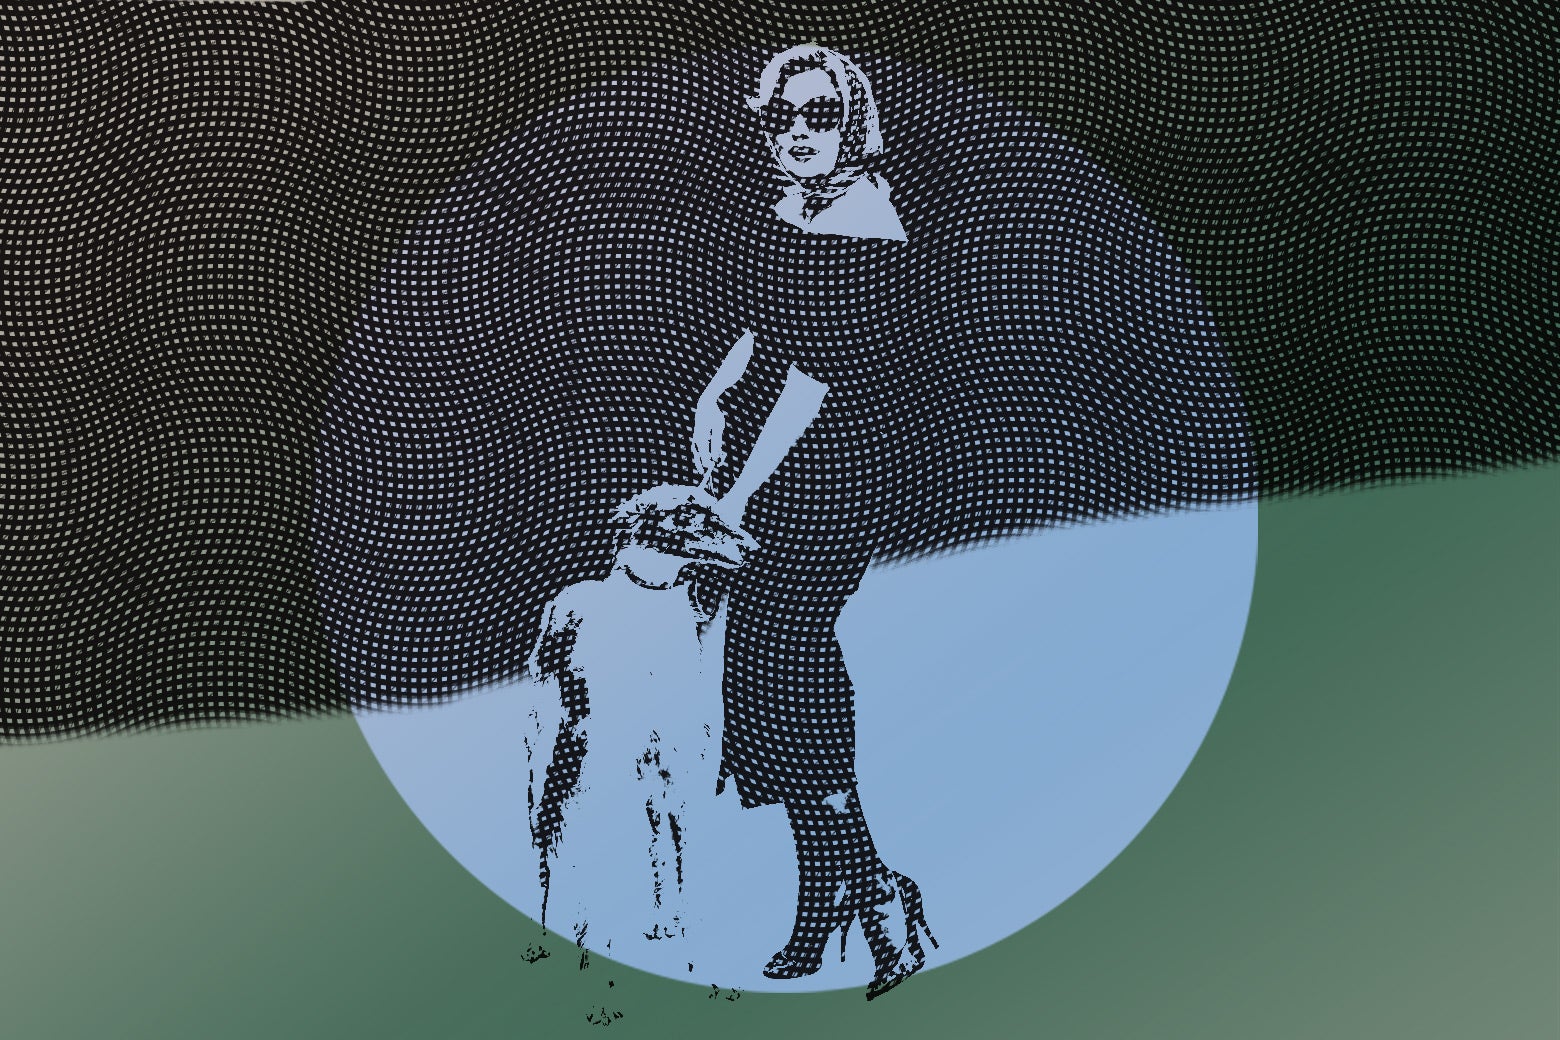 A woman wearing sunglasses and a headscarf walks her dog